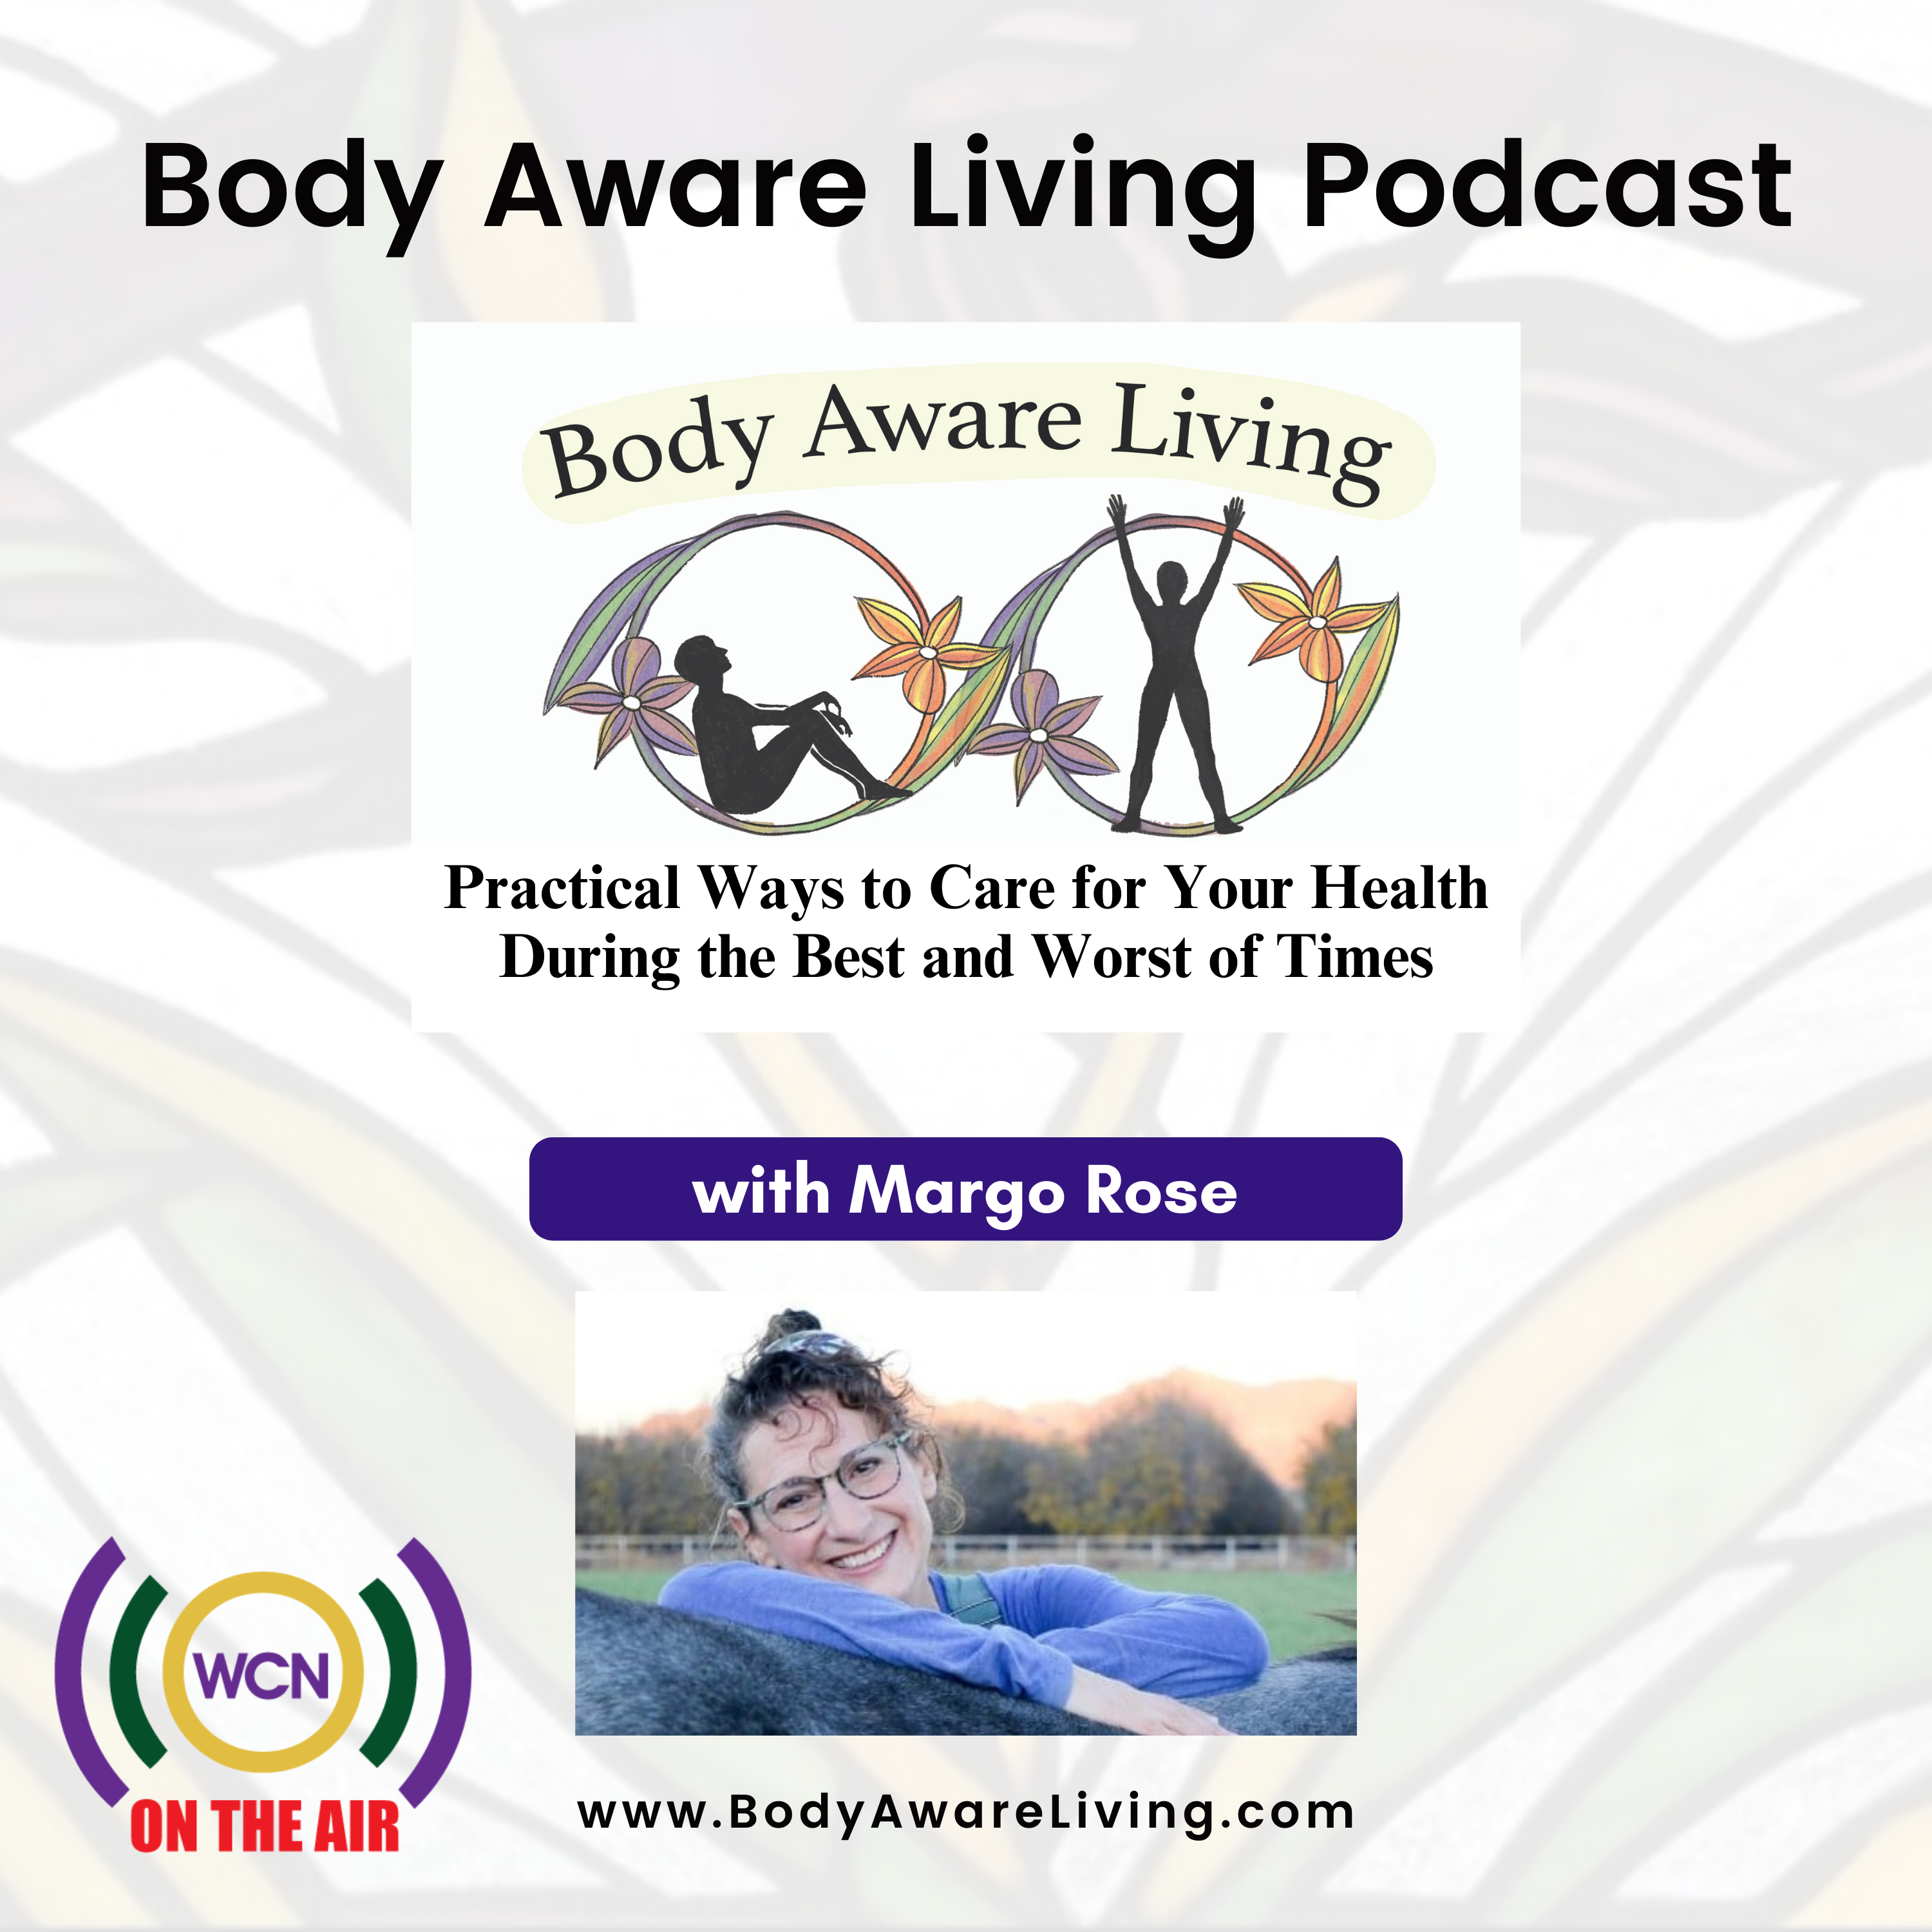 https://thewholecarenetwork.com/wp-content/uploads/2023/05/BAL-PODCAST-ON-WCN-COVER.png